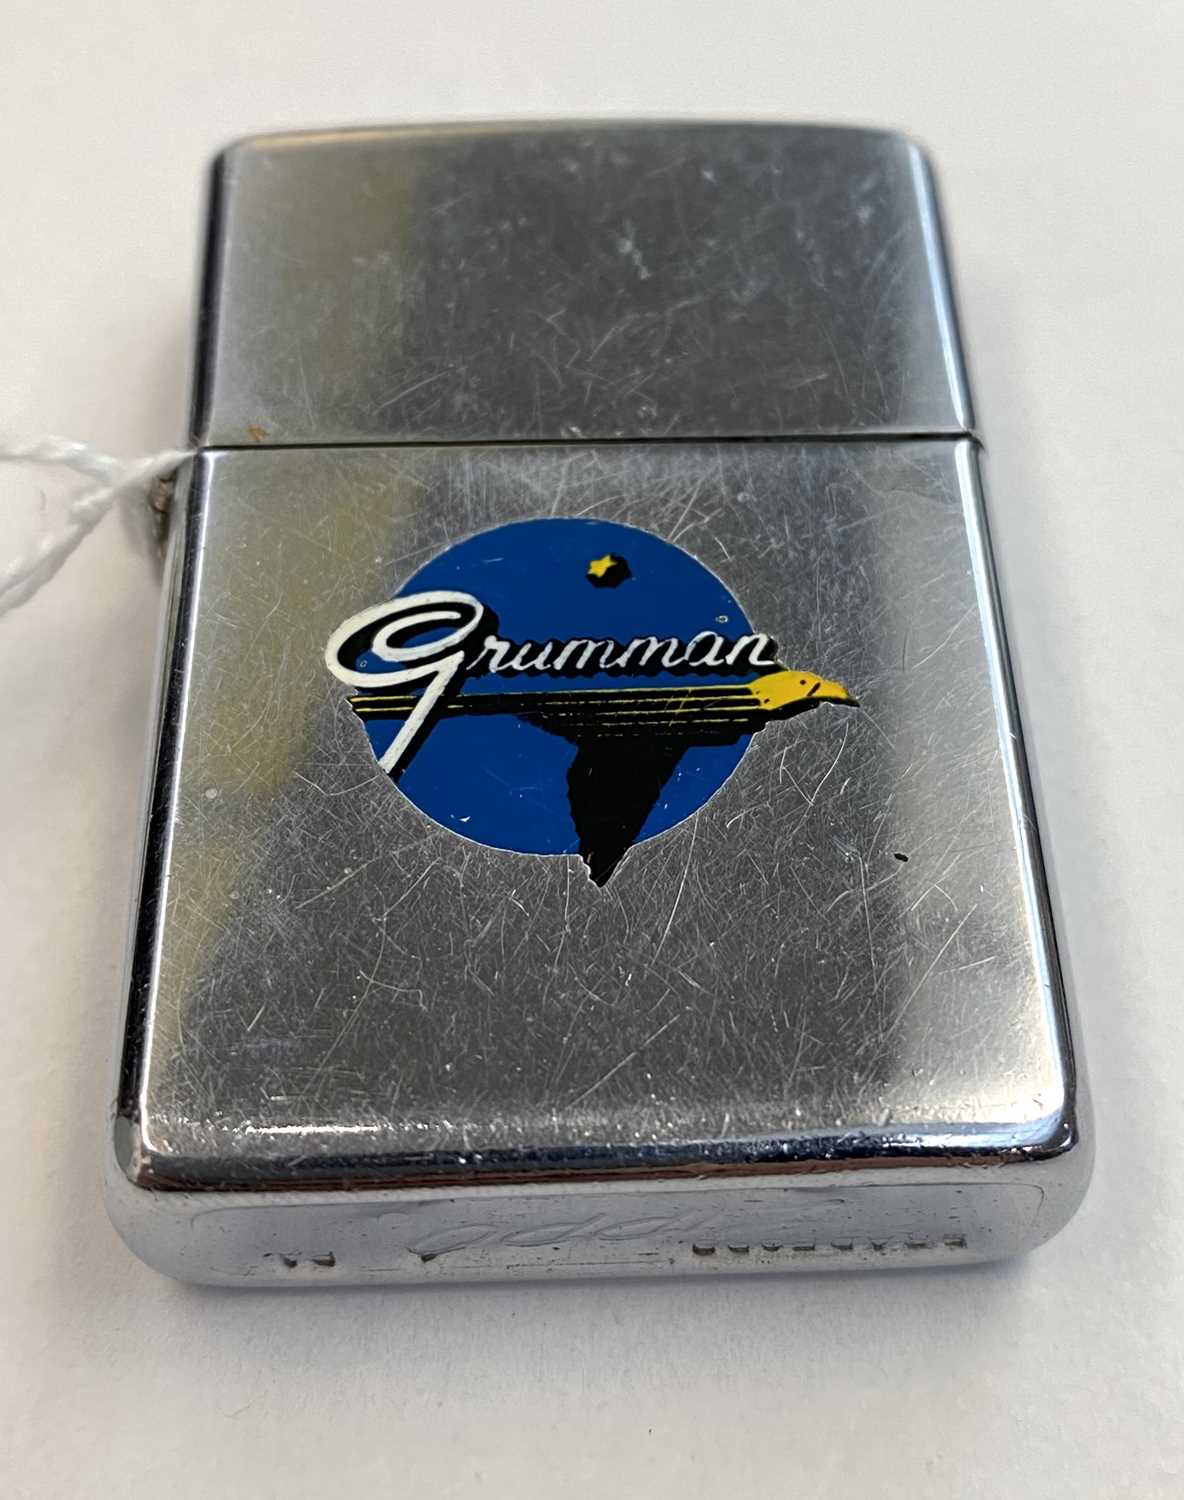 A Zippo Town and Country lighter advertising Grumman AviationCondition report: The wick is used. - Image 6 of 6